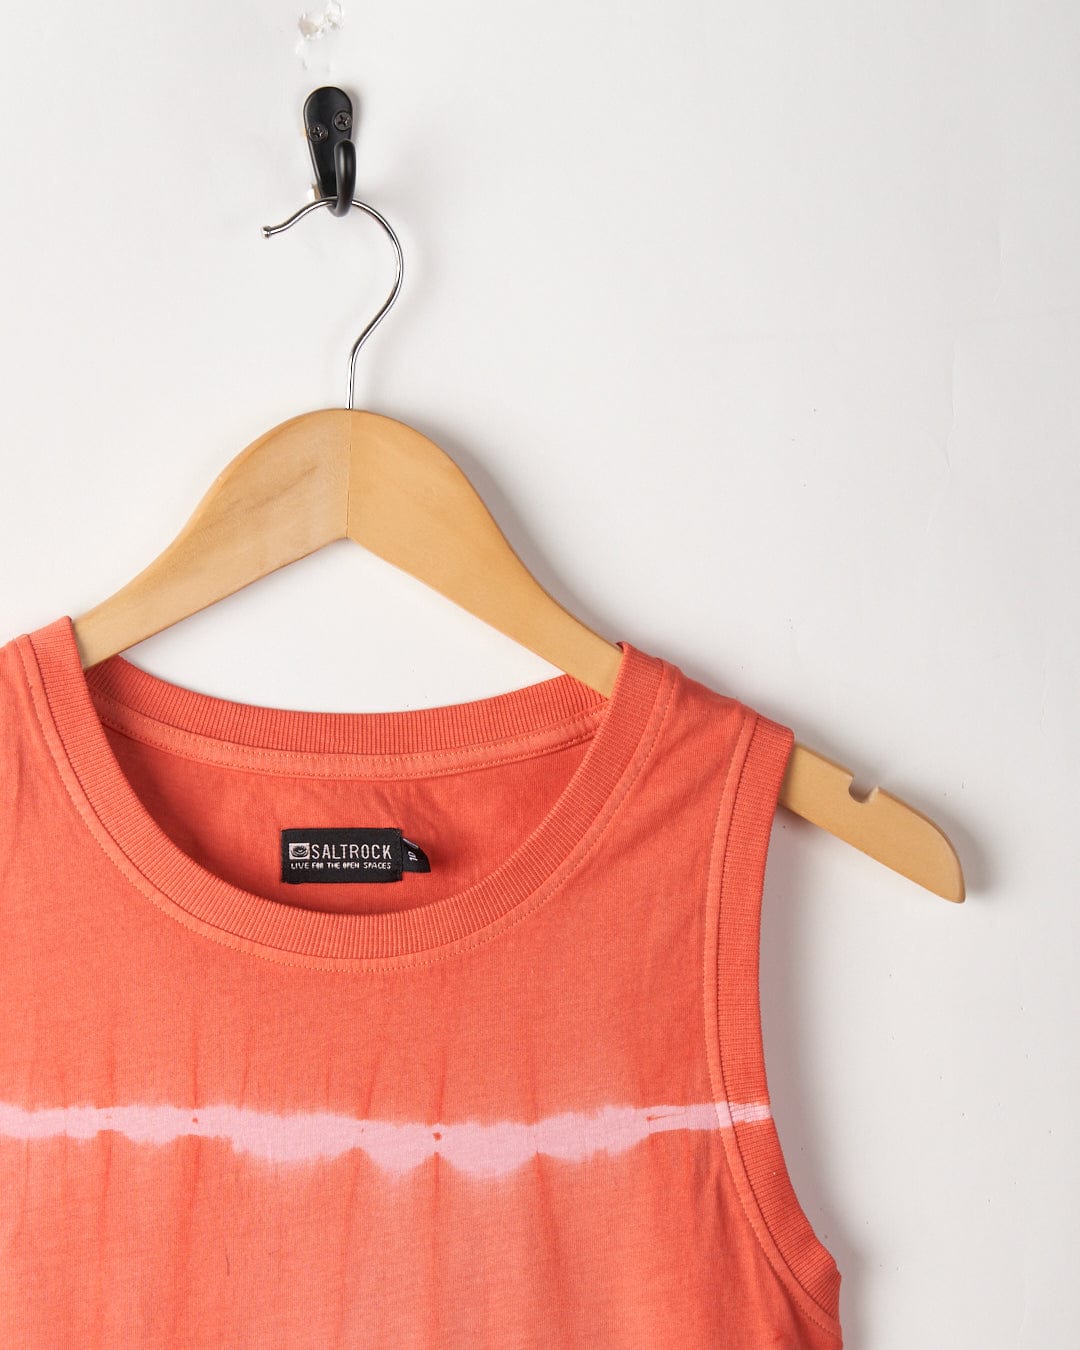 An Eliana - Women's Tie Dye Vest Dress - Peach is hanging on a wooden hanger against a white wall. The label reads "Saltrock," featuring embroidered Saltrock branding.